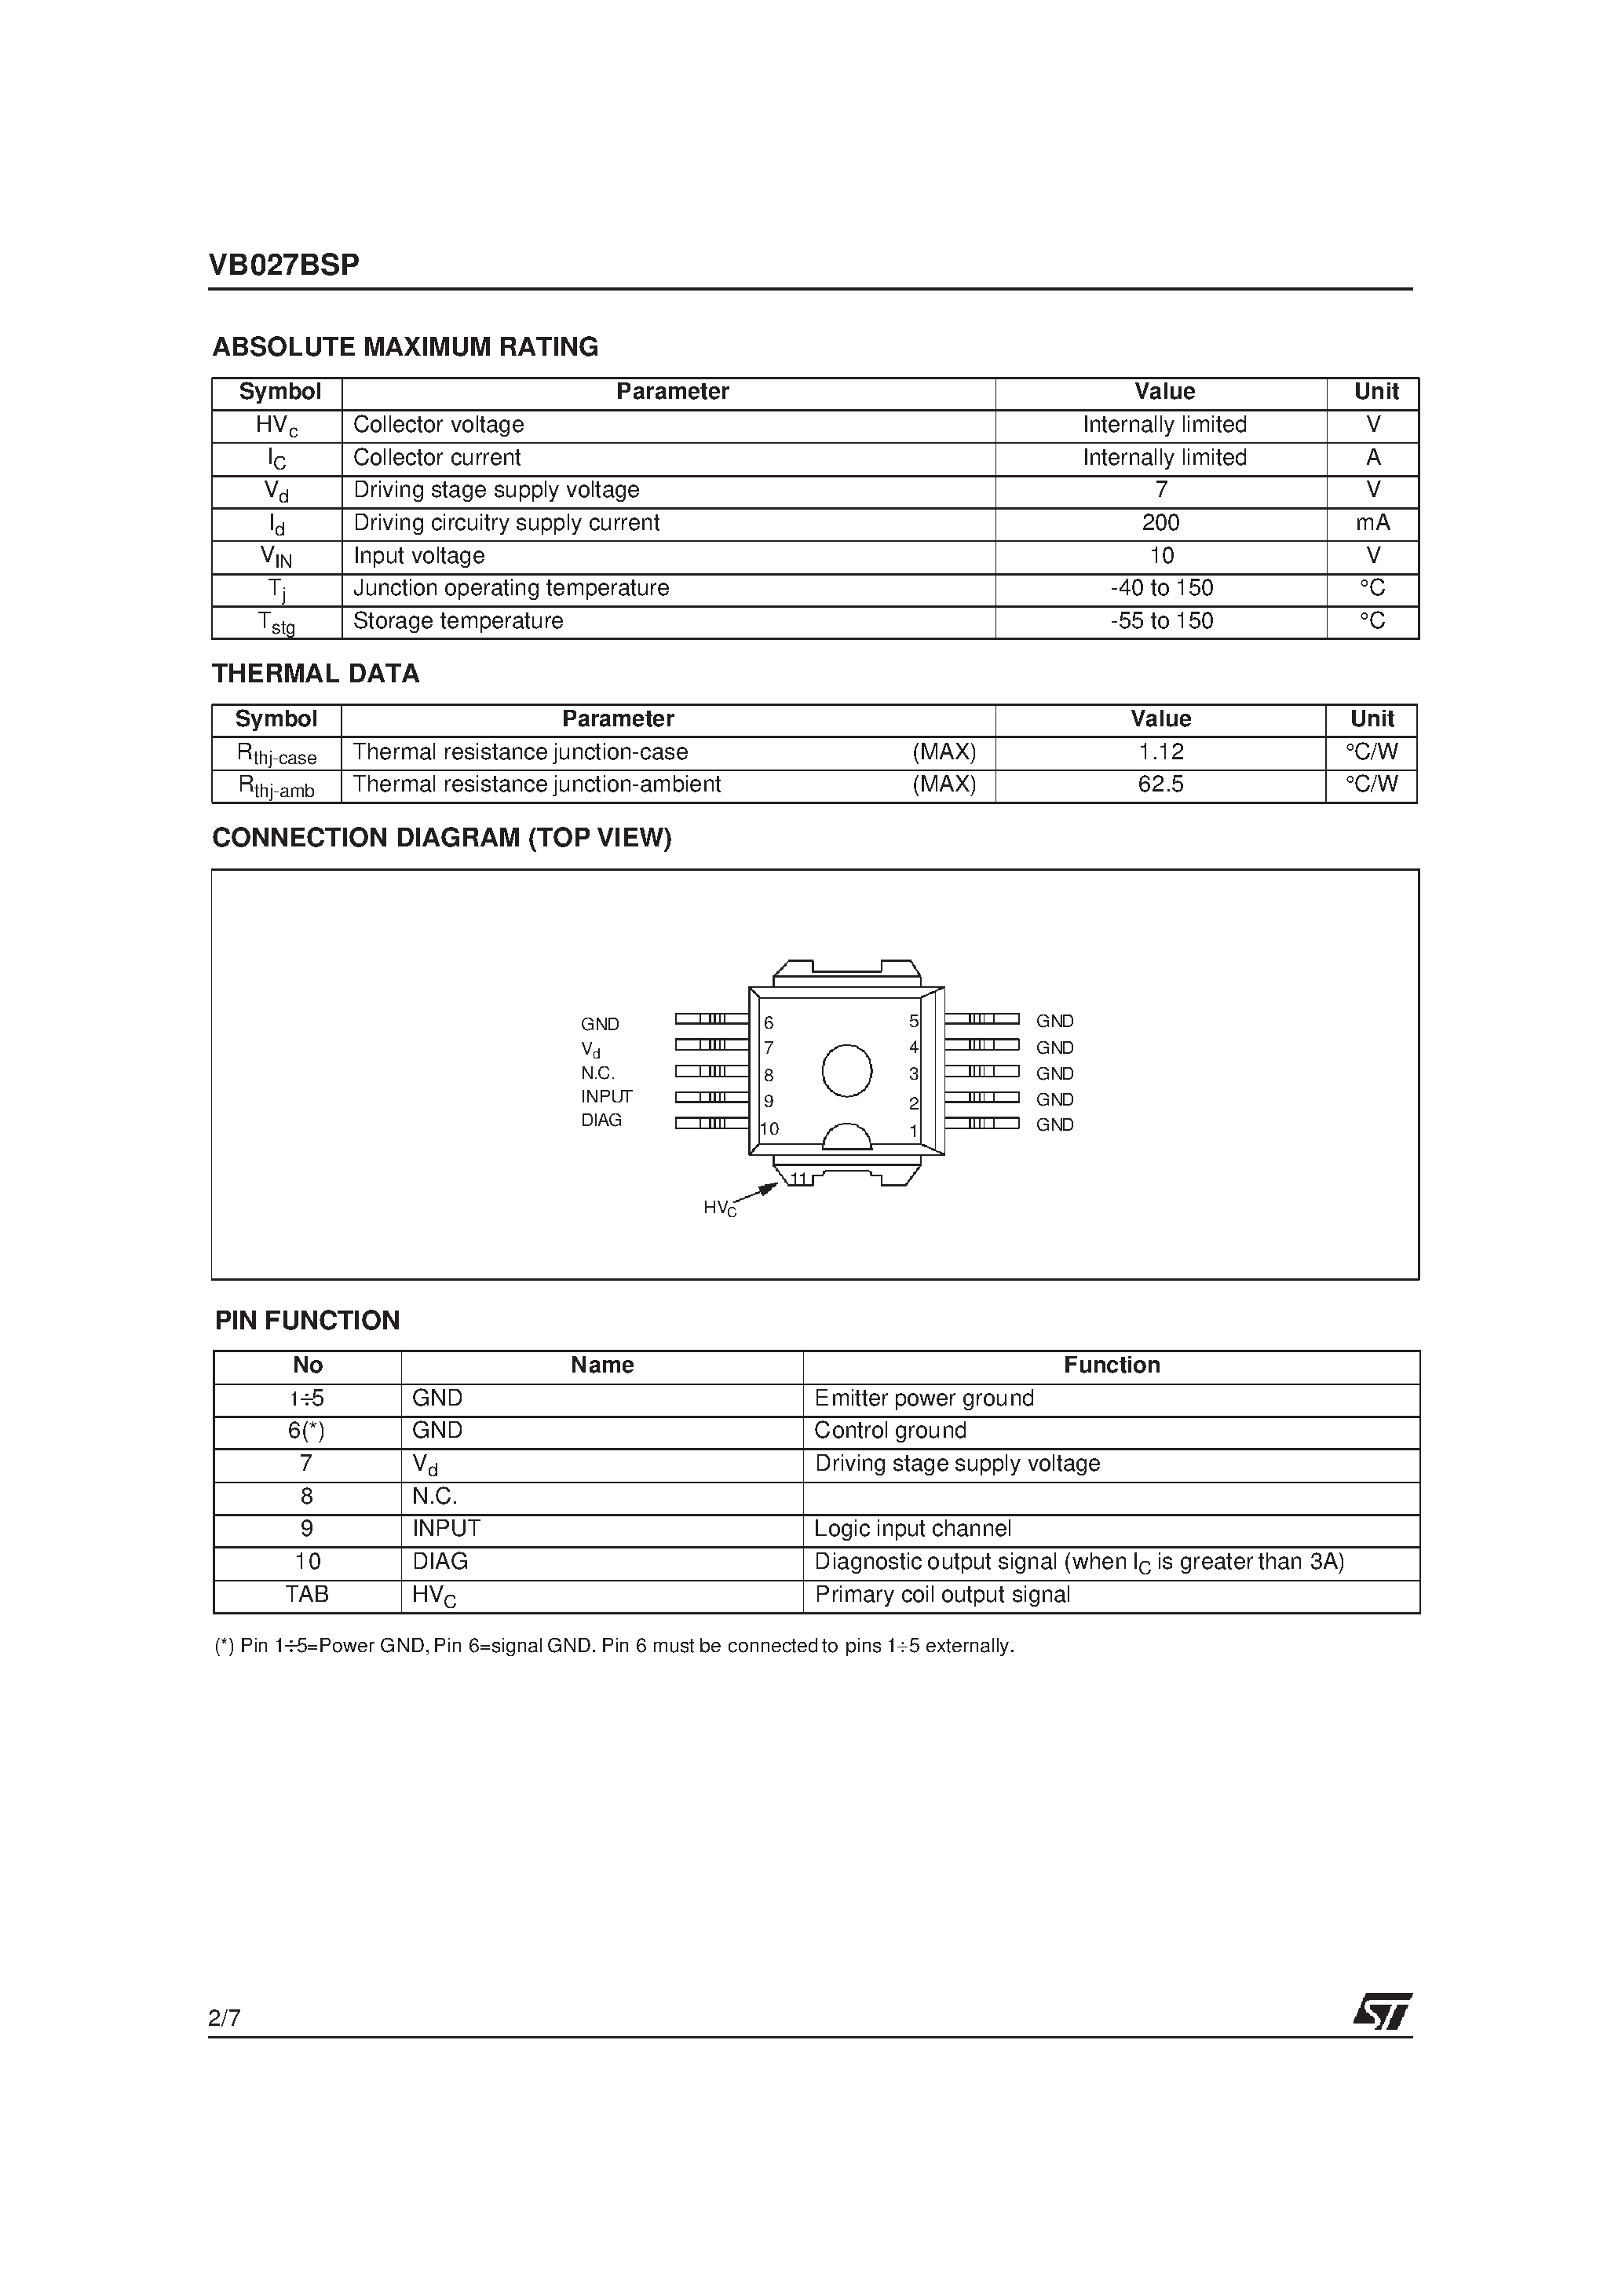 Datasheet VB027BSP - HIGH VOLTAGE IGNITION COIL DRIVER POWER I.C. page 2